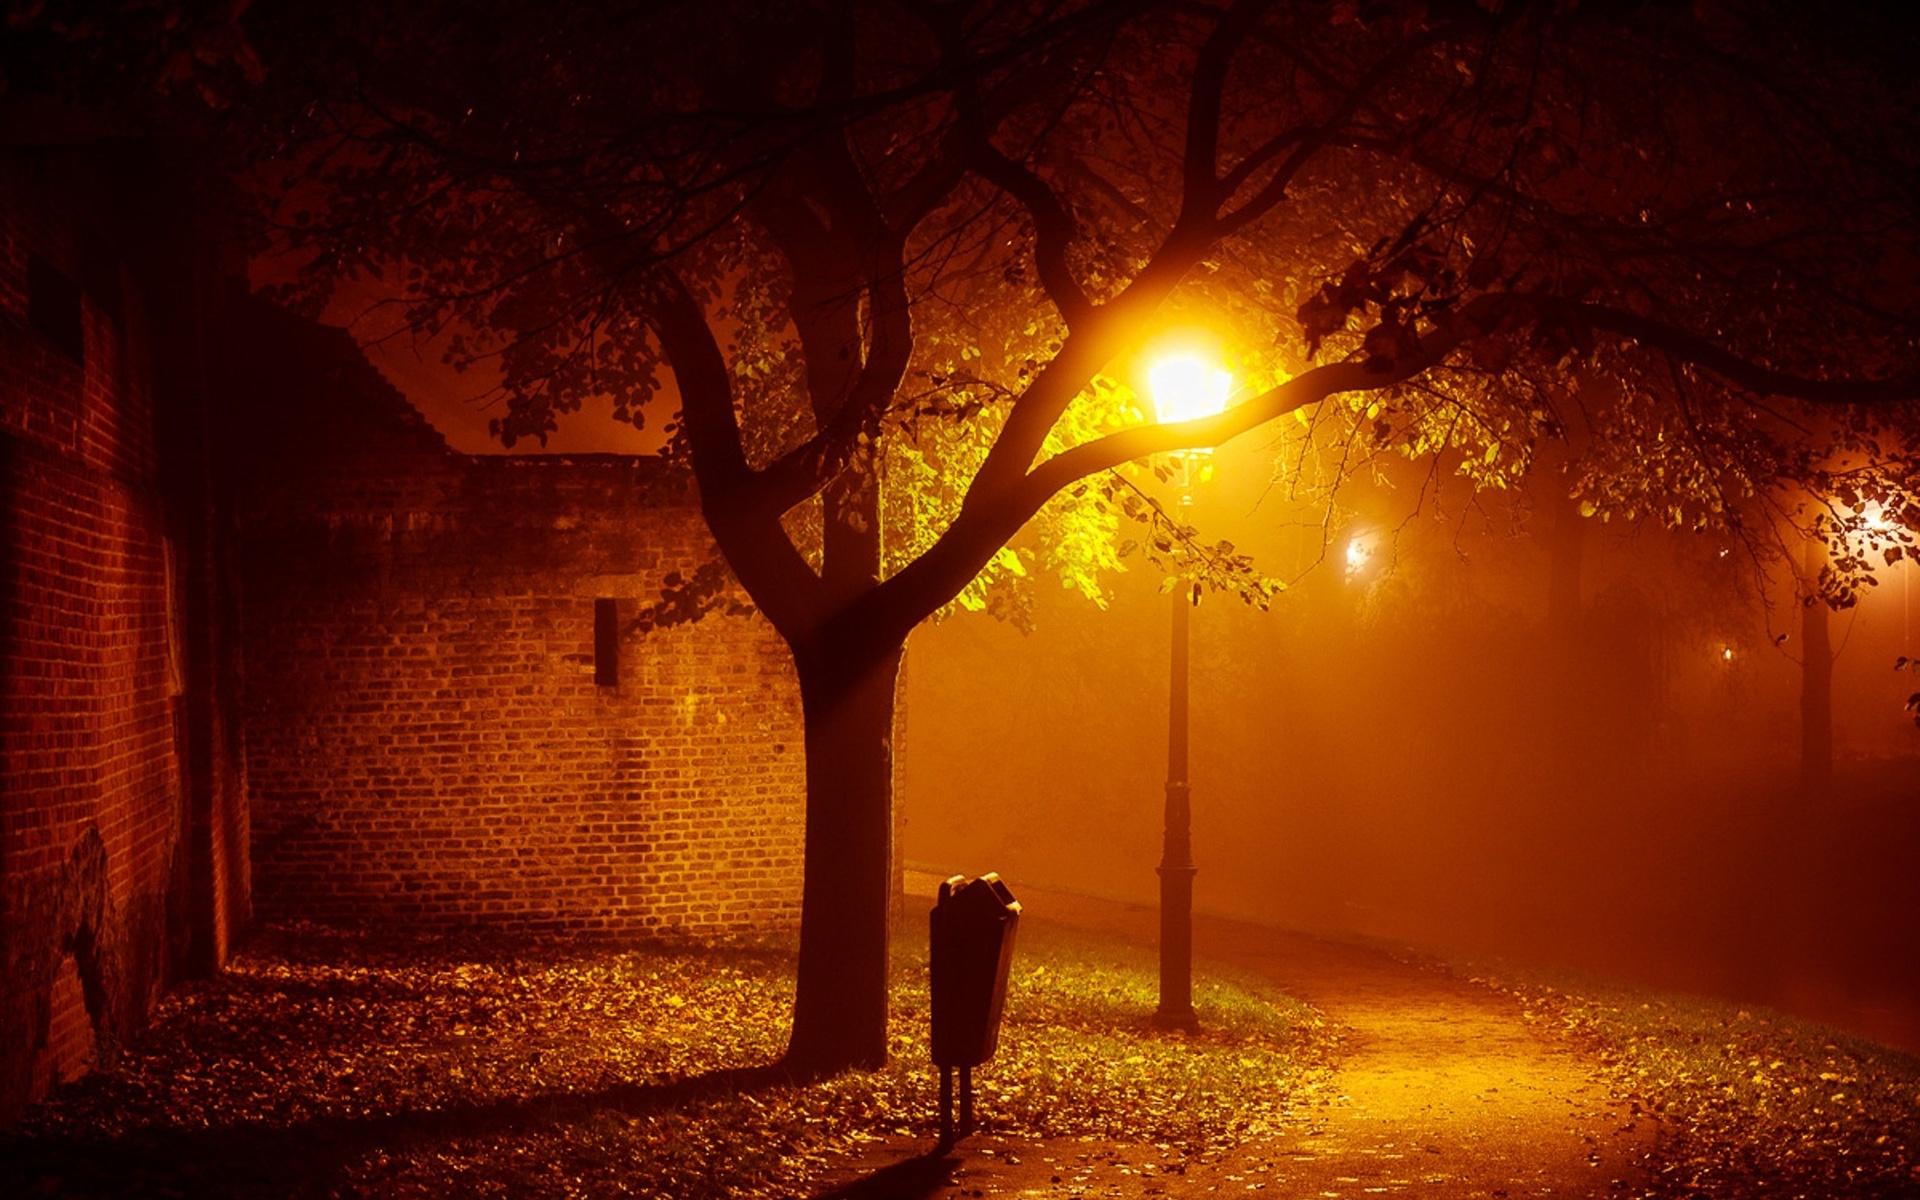 Landscapes Night Lights Mood Autumn Fall Seasonal Fog Mist Places Houses Buildings Architecture Trees Lamps Lamp Posts Photography Wallpaperx1200